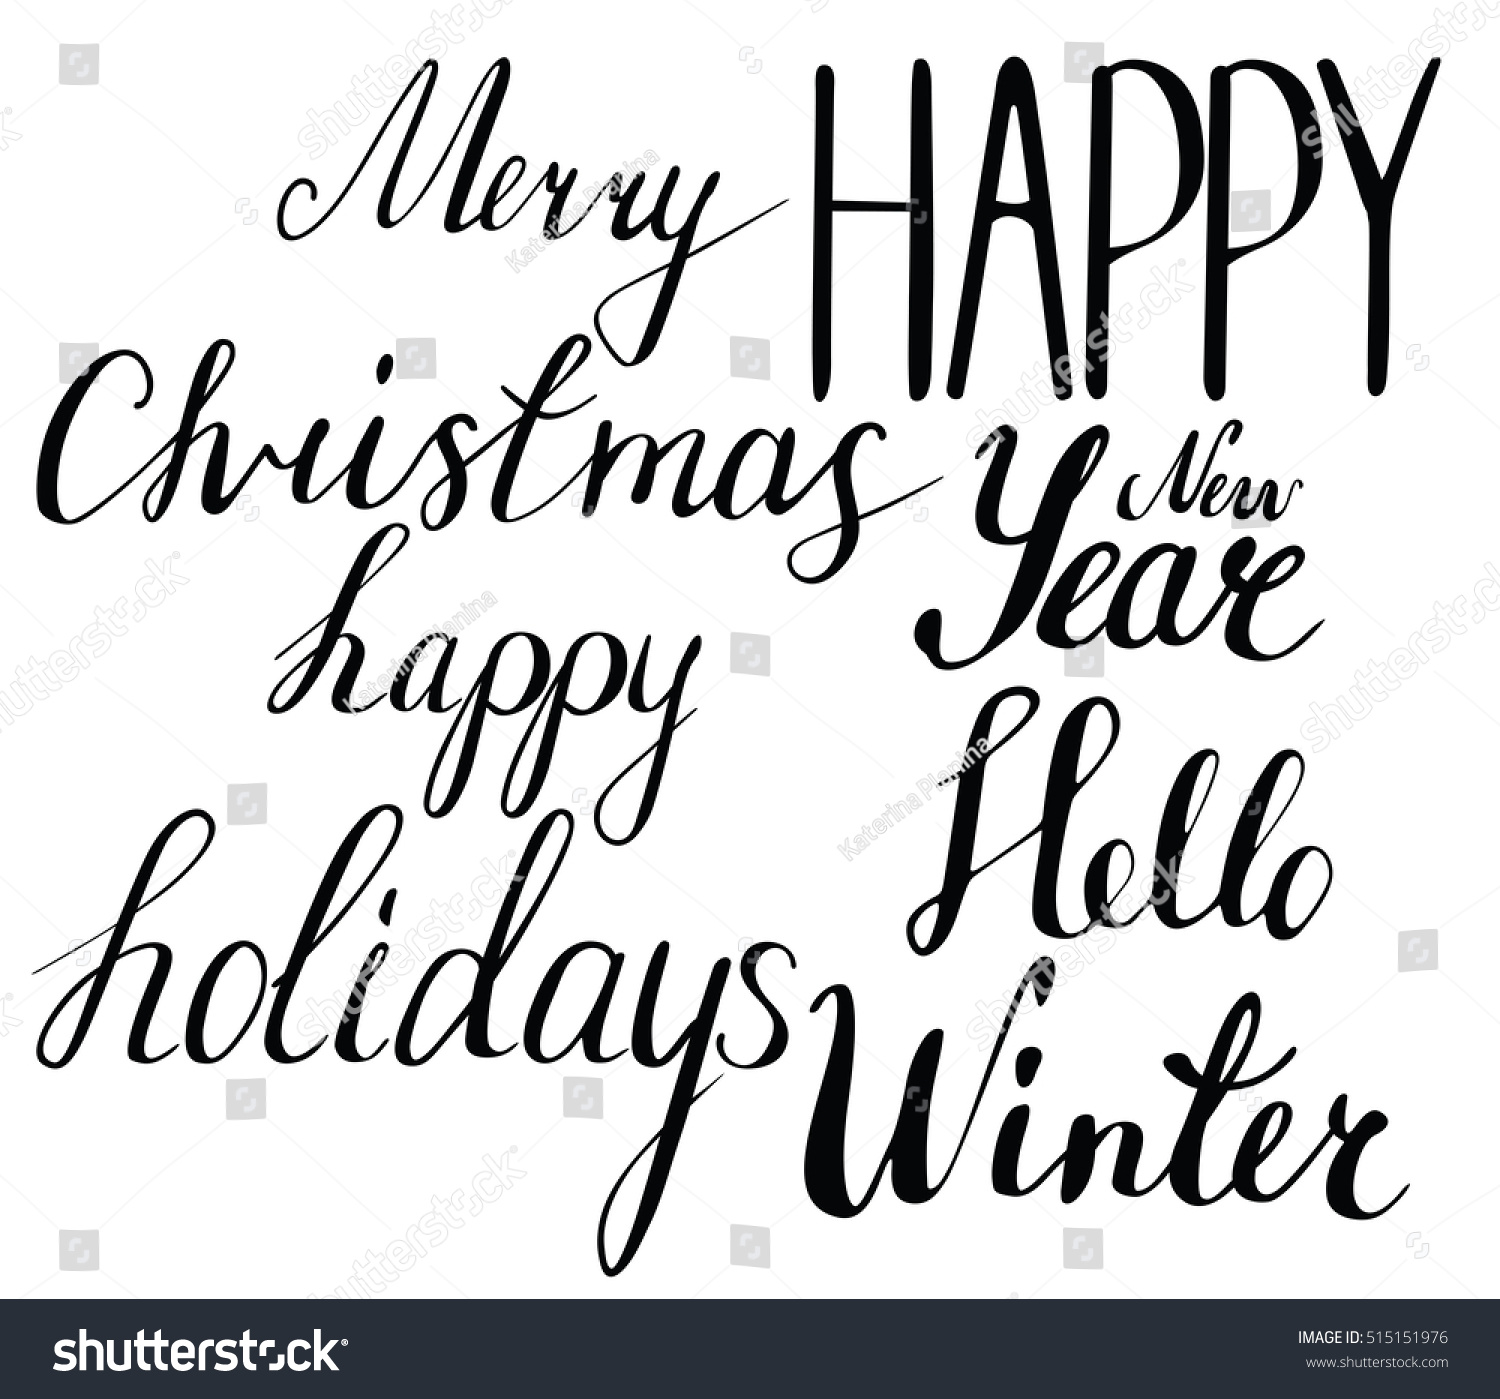 Hand drawn calligraphy words Merry Christmas Happy New Year Hello Winter Happy